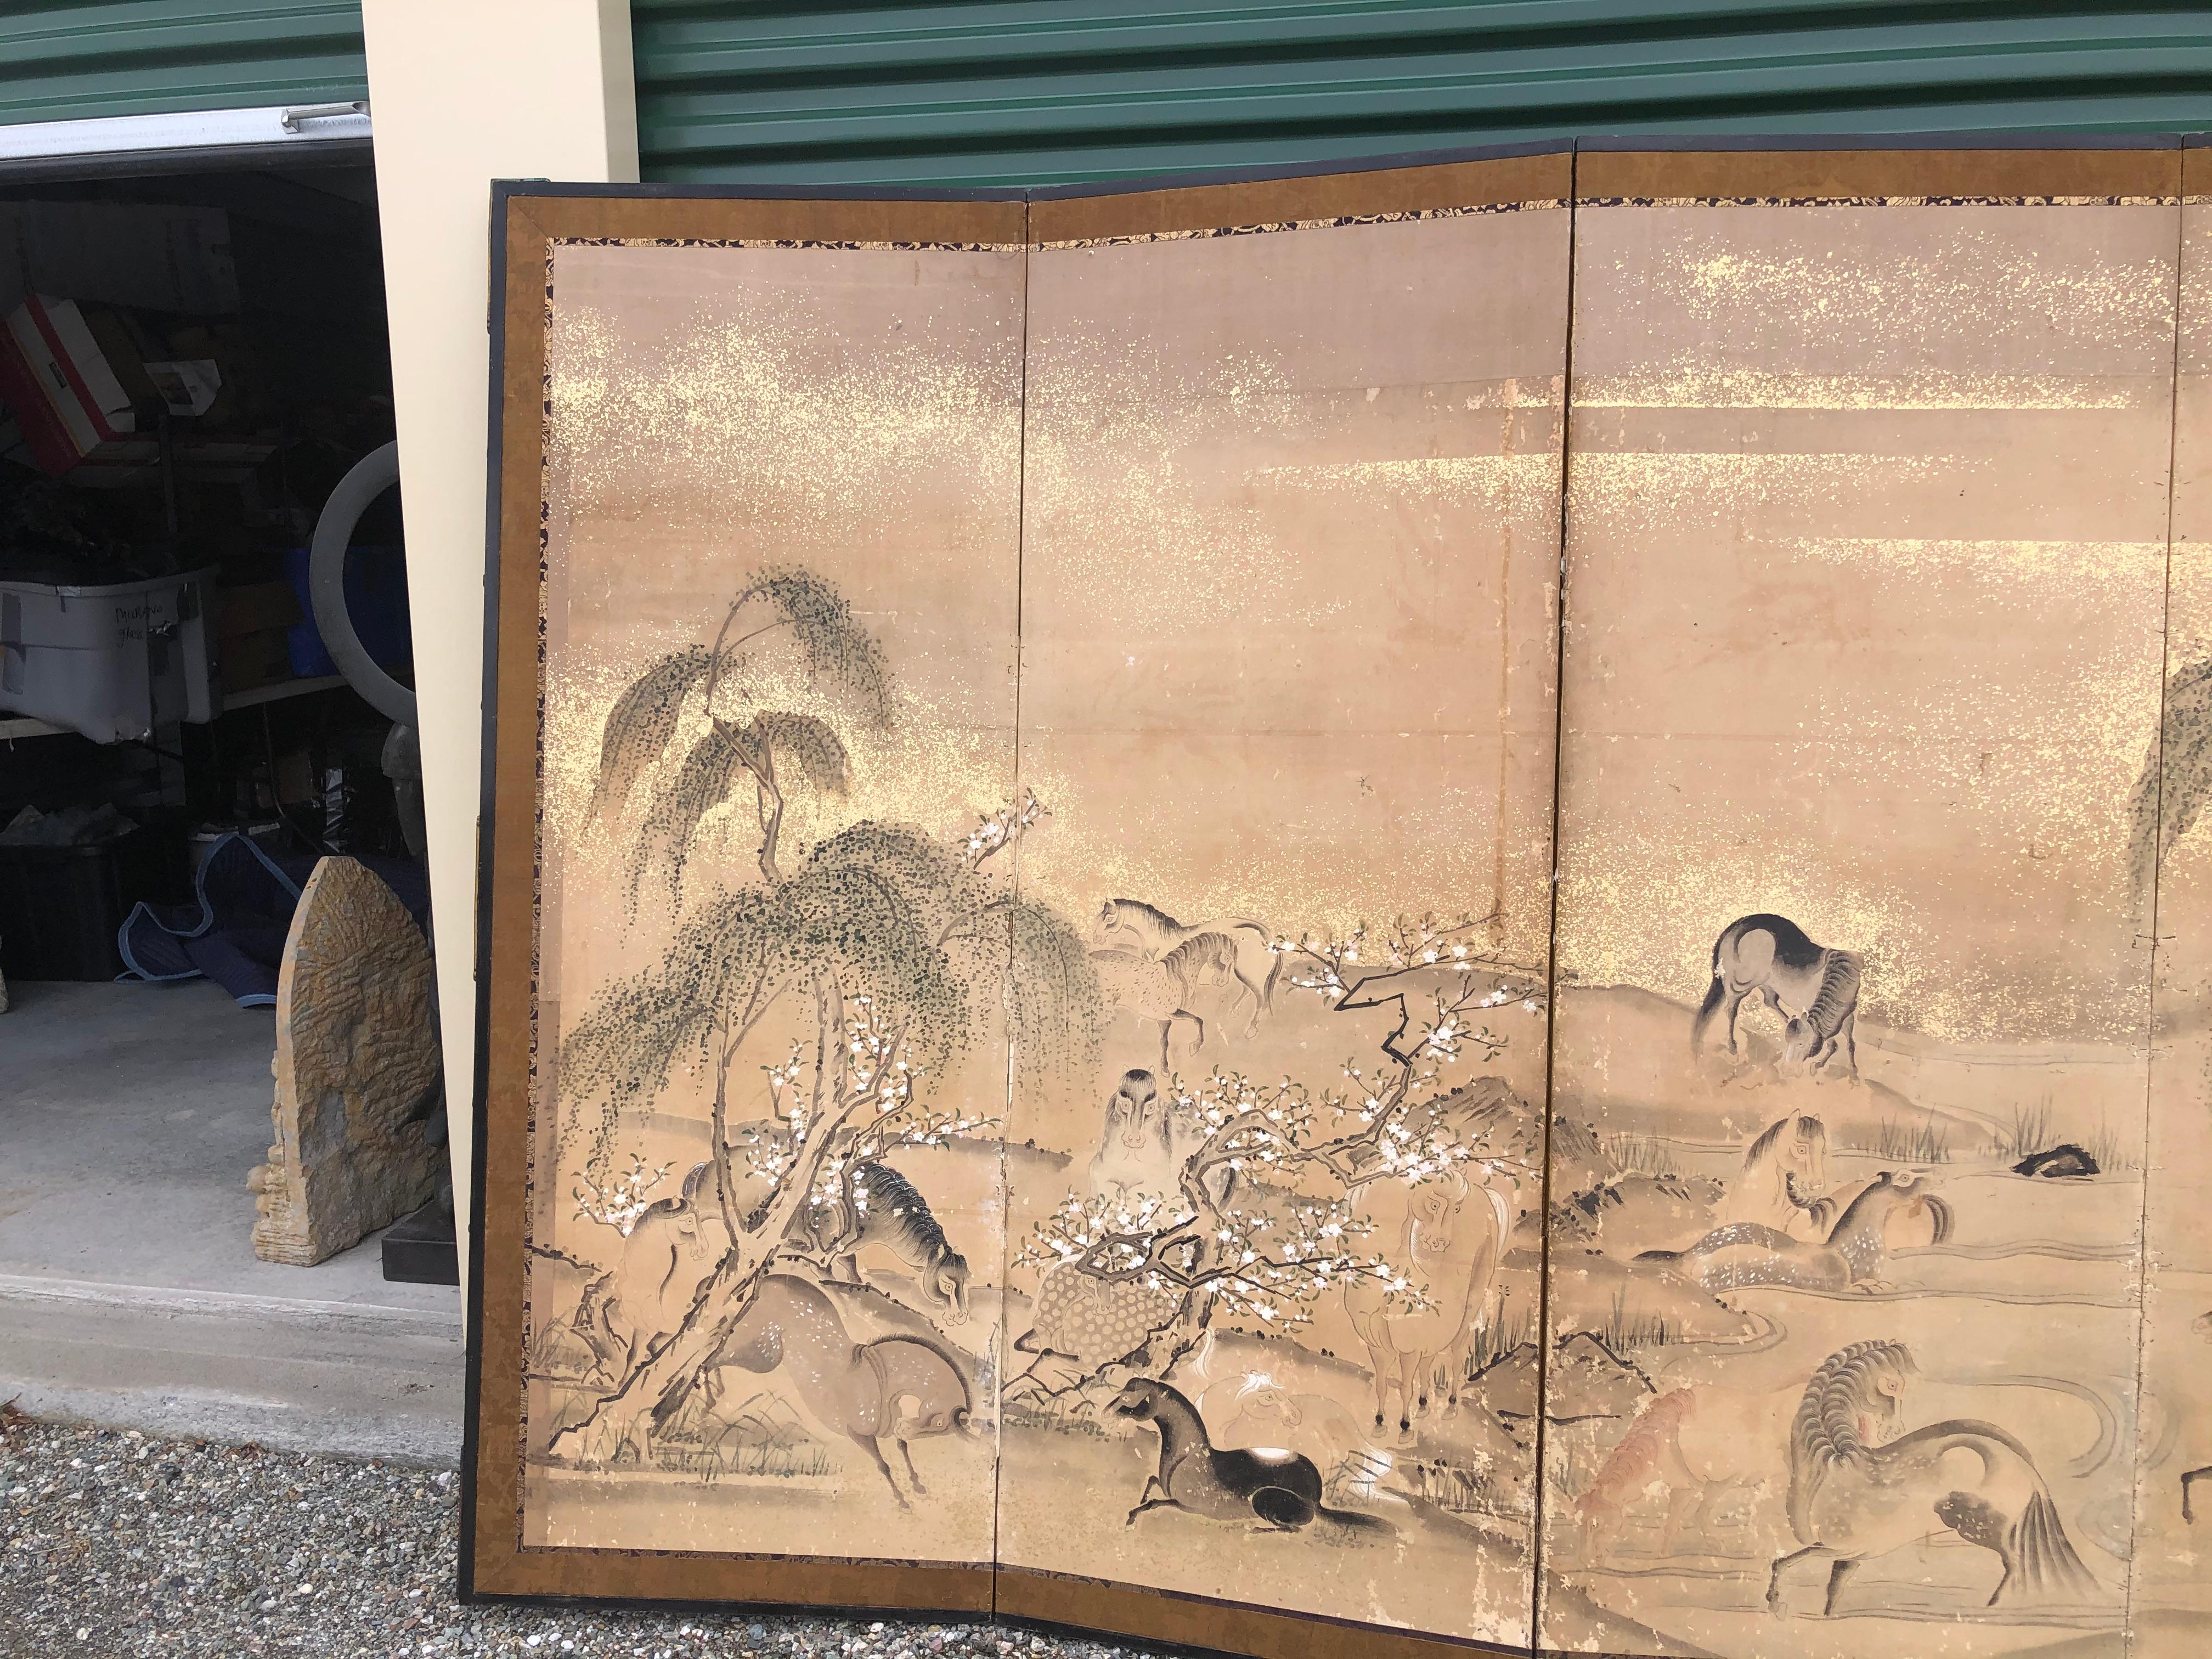 Japan, an early six-panel screen Byobu depicting 20 horses frolicking among mountains and pines. This attractive screen dates to the Edo period, circa 1850.

Horses are a scarce motif for Japanese screens and we are pleased to have found this one on